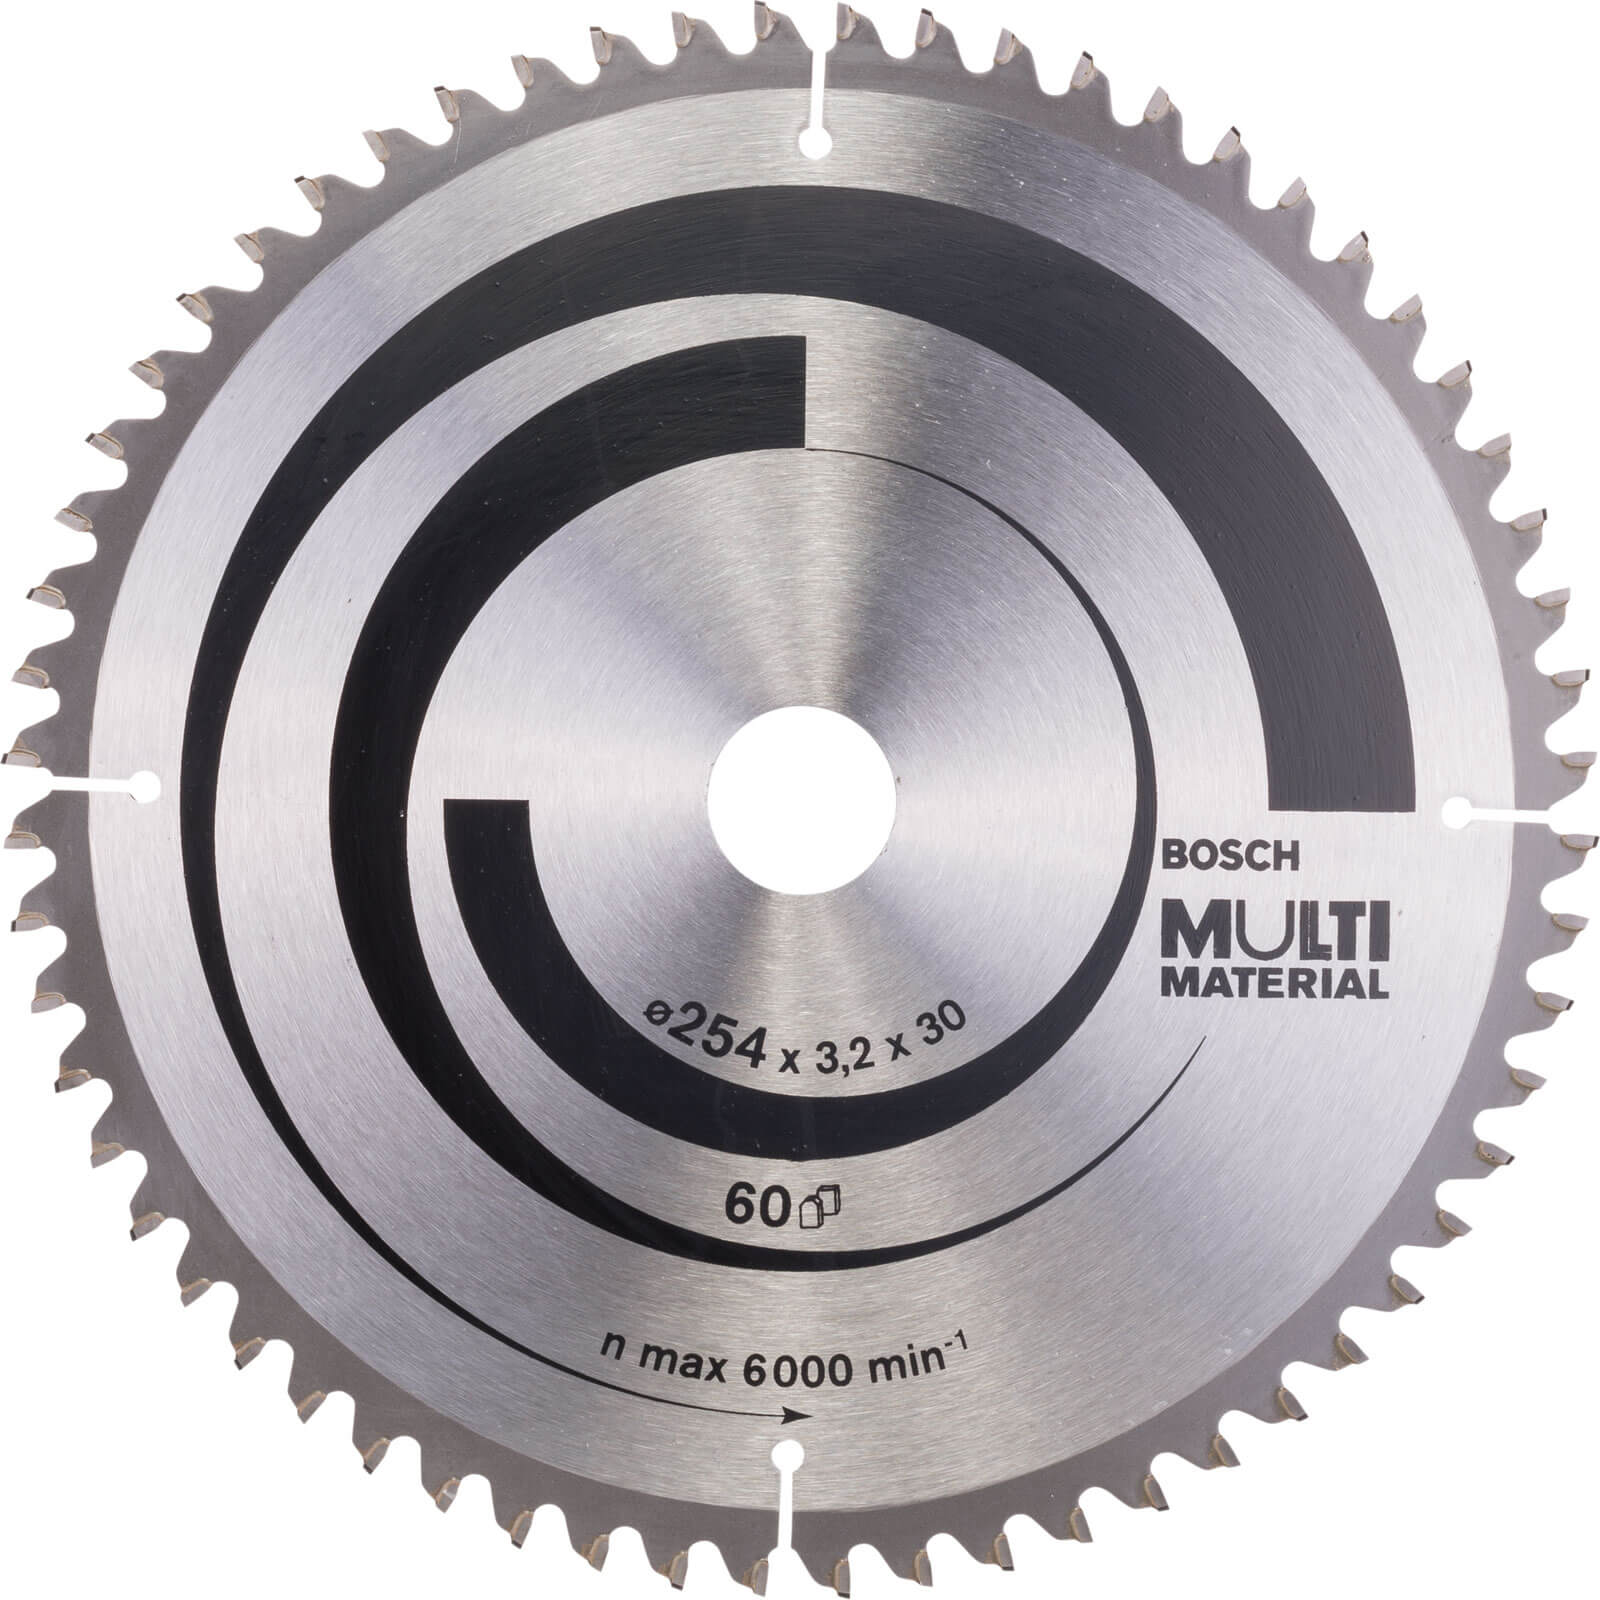 Image of Bosch Multi Material Cutting Mitre and Table Saw Blade 254mm 60T 30mm